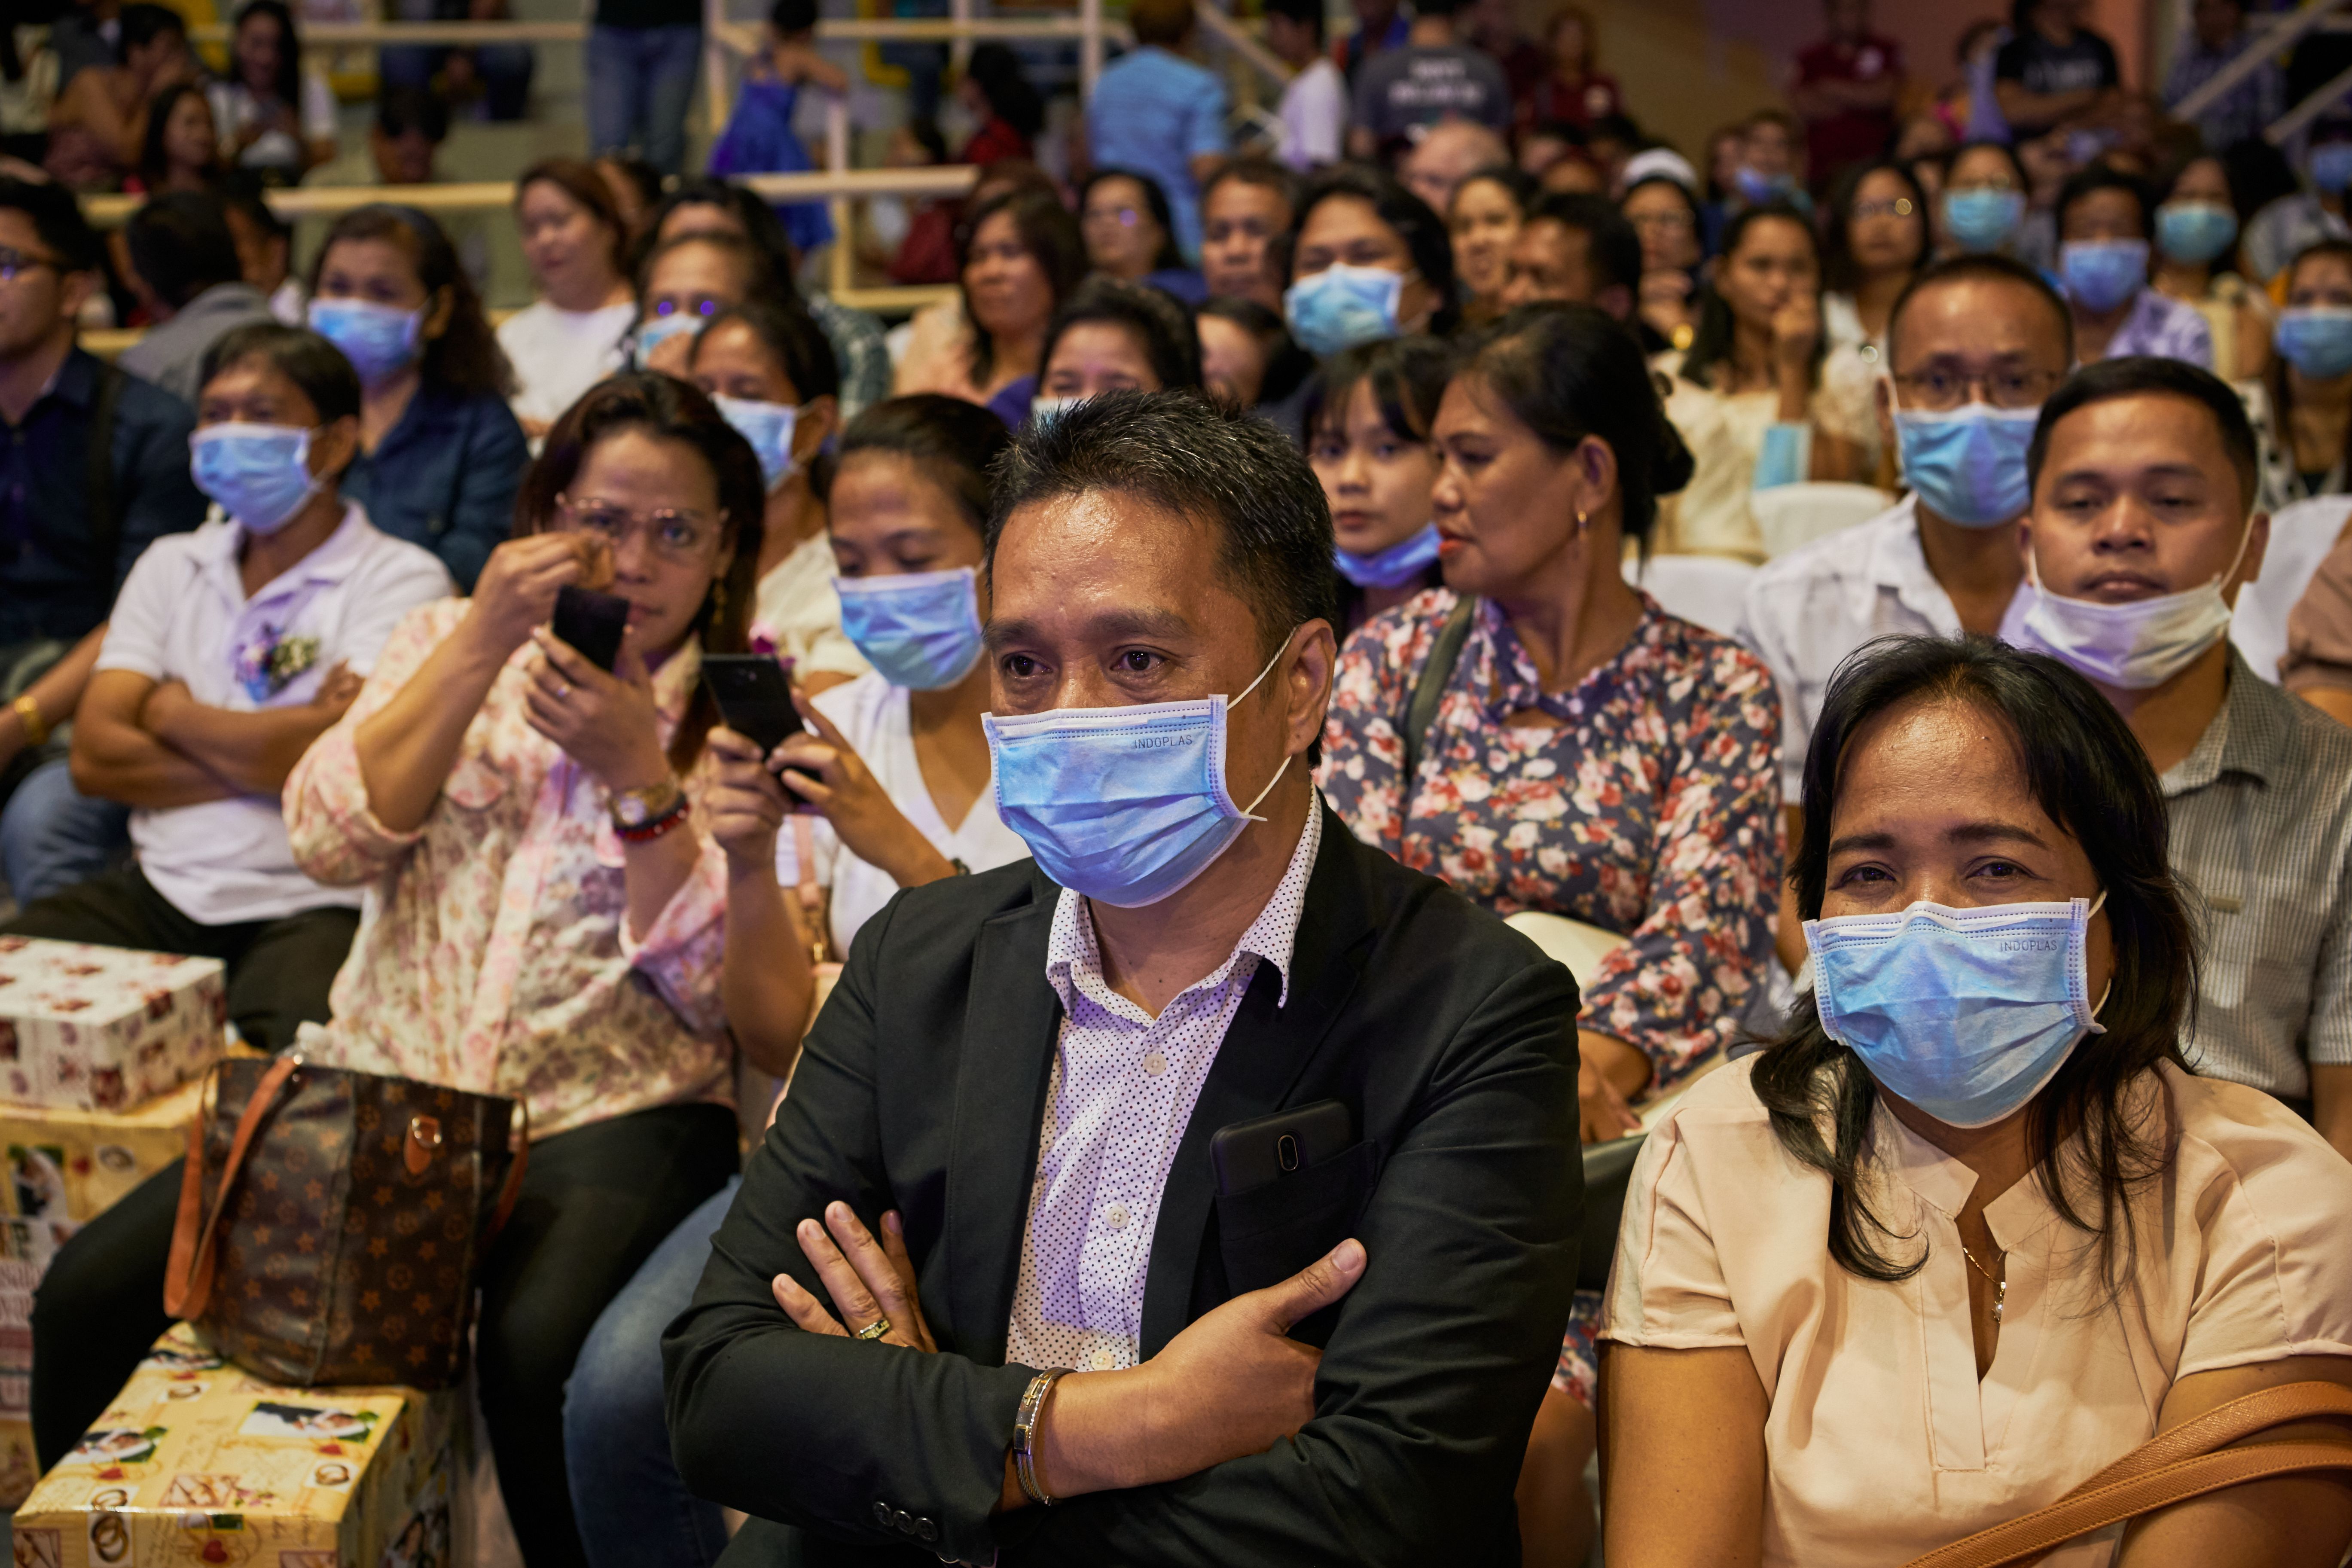 In this image, rows of people wear face masks at a wedding